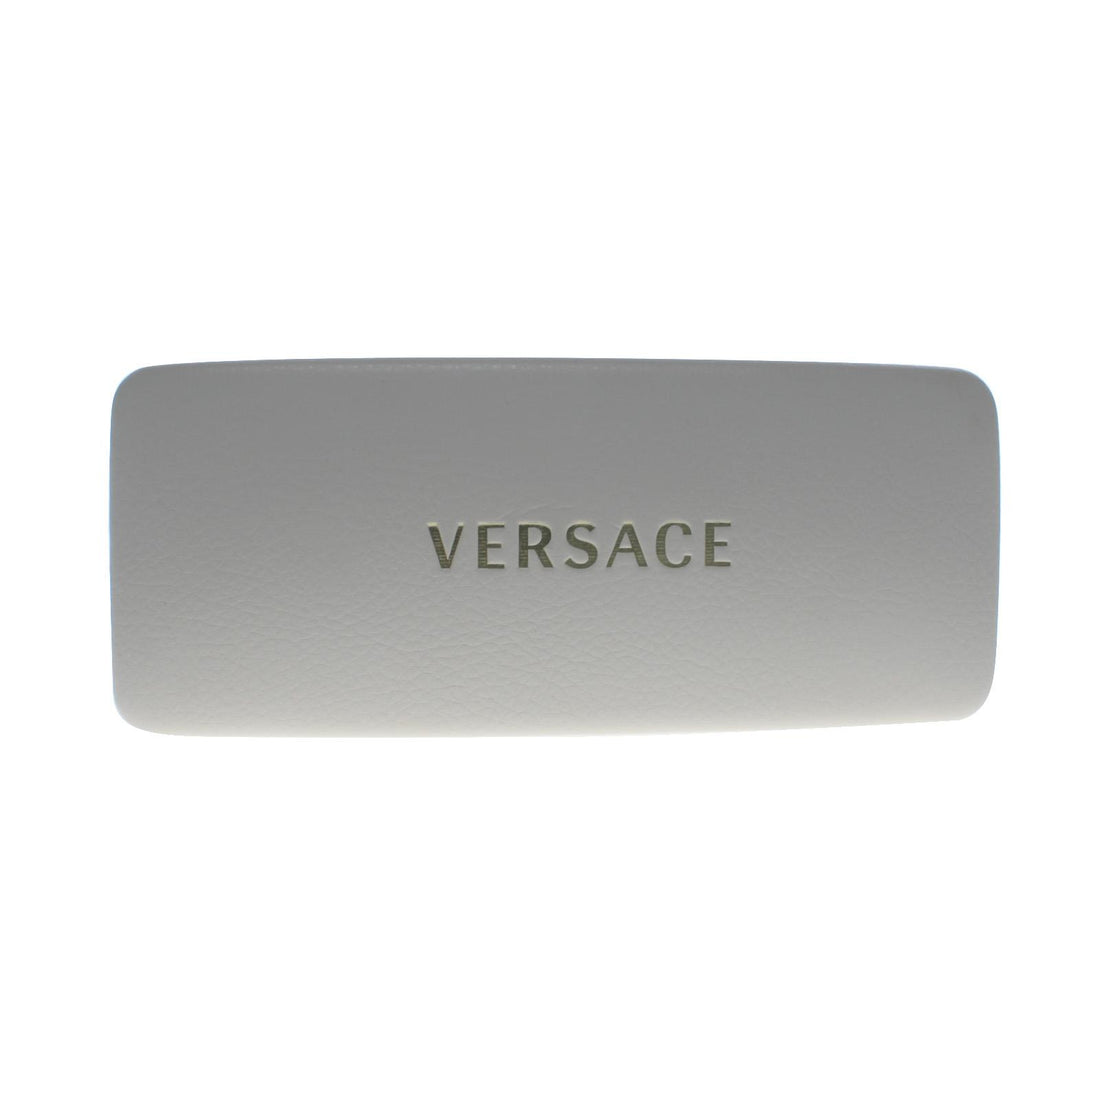 Versace small white faux leather clamshell Glasses Case